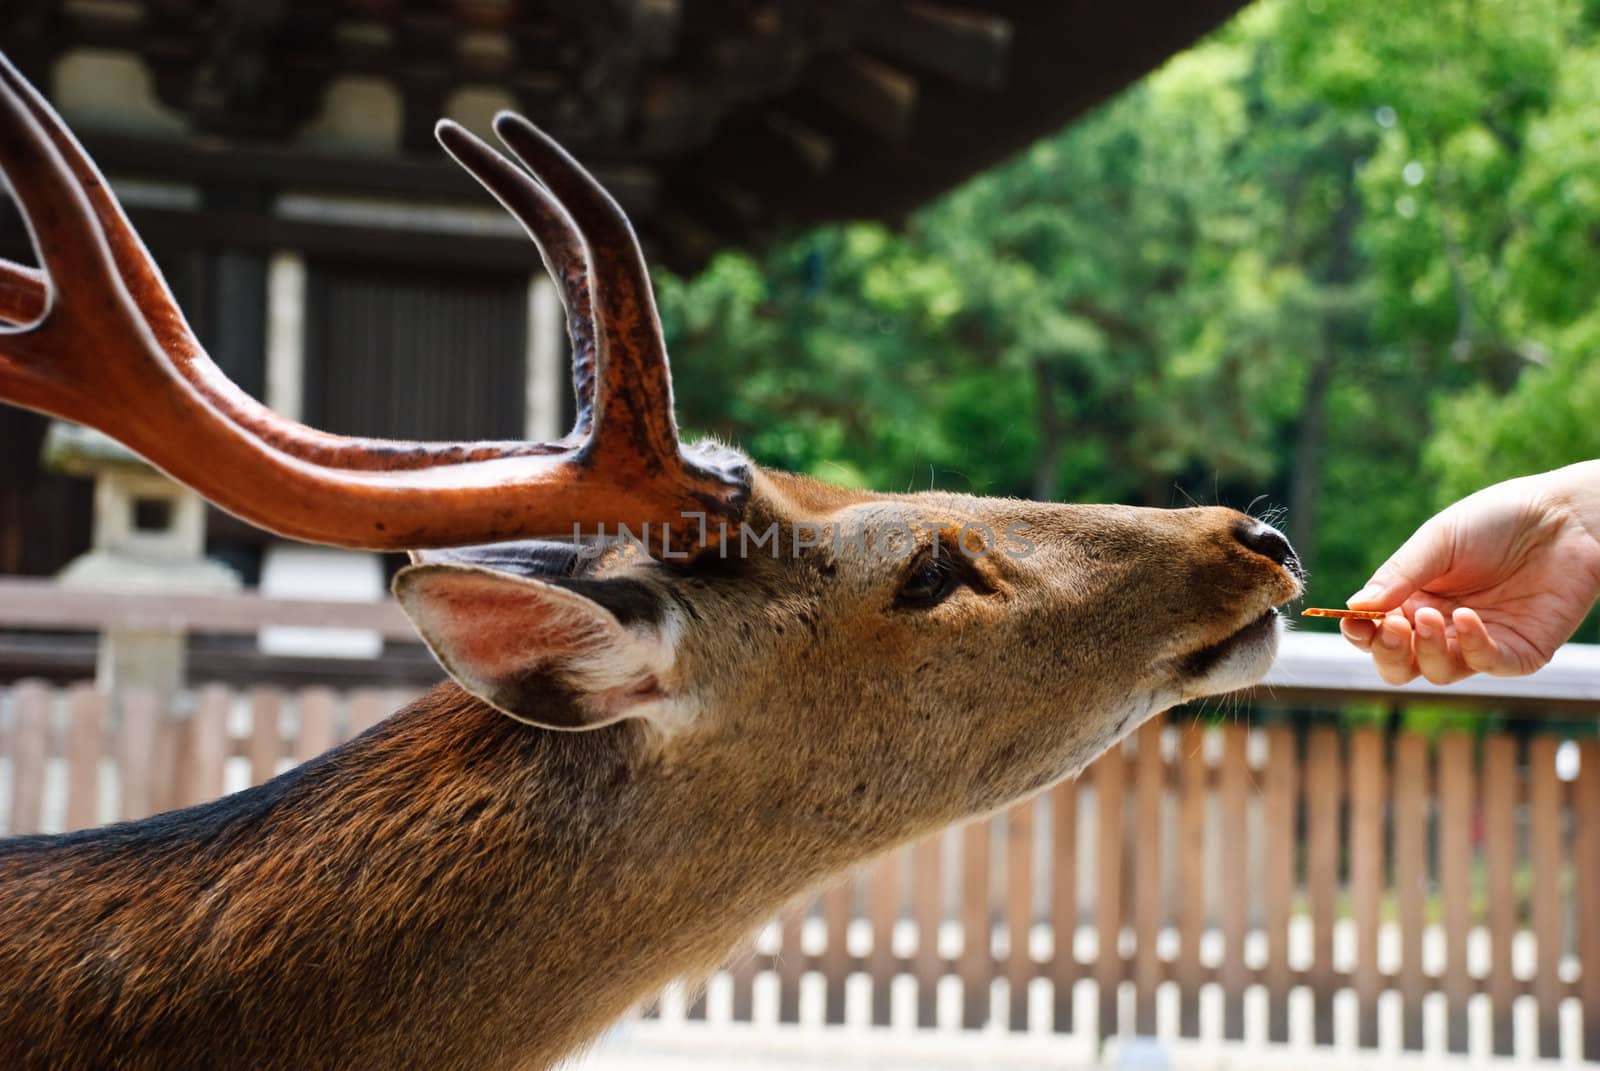 A spotted deer eating a biscuit from a human hand in Nara, Japan.